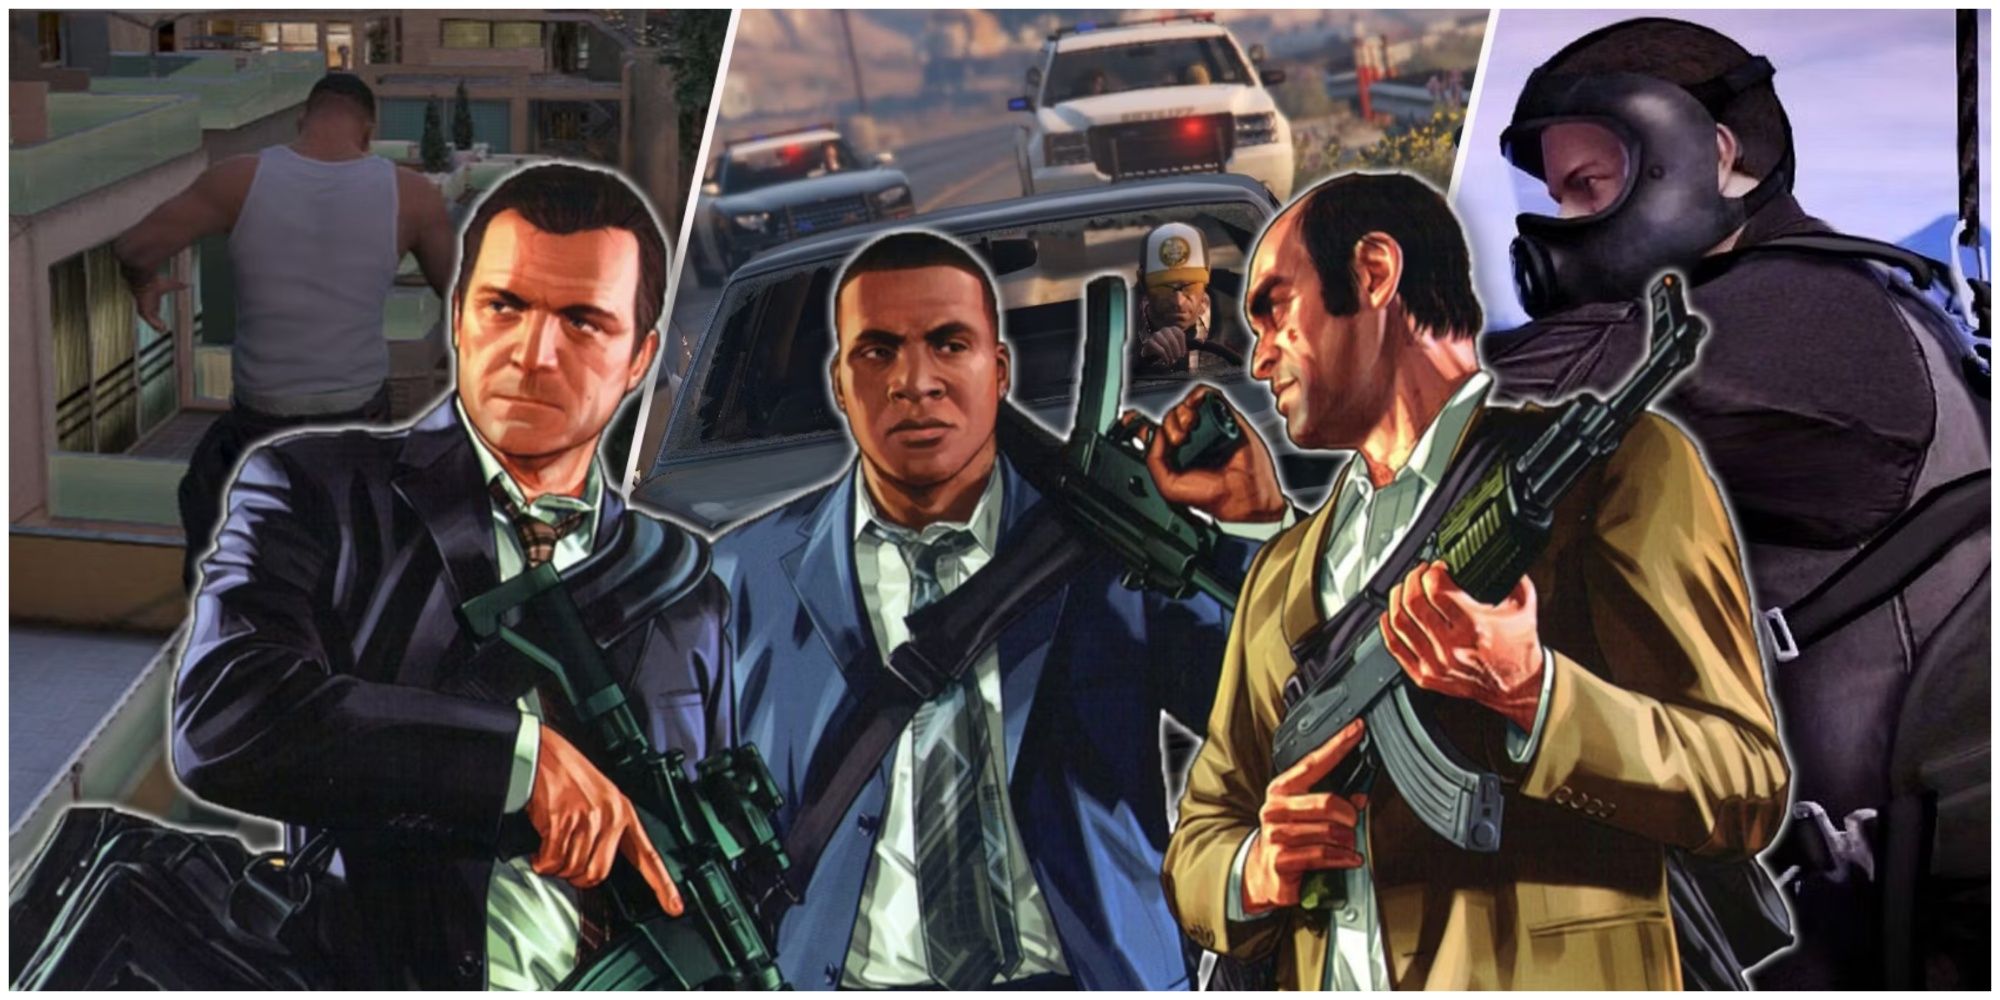 Grand Theft Auto 5 Mega Guide: Cheat Codes, Special Abilities, Map